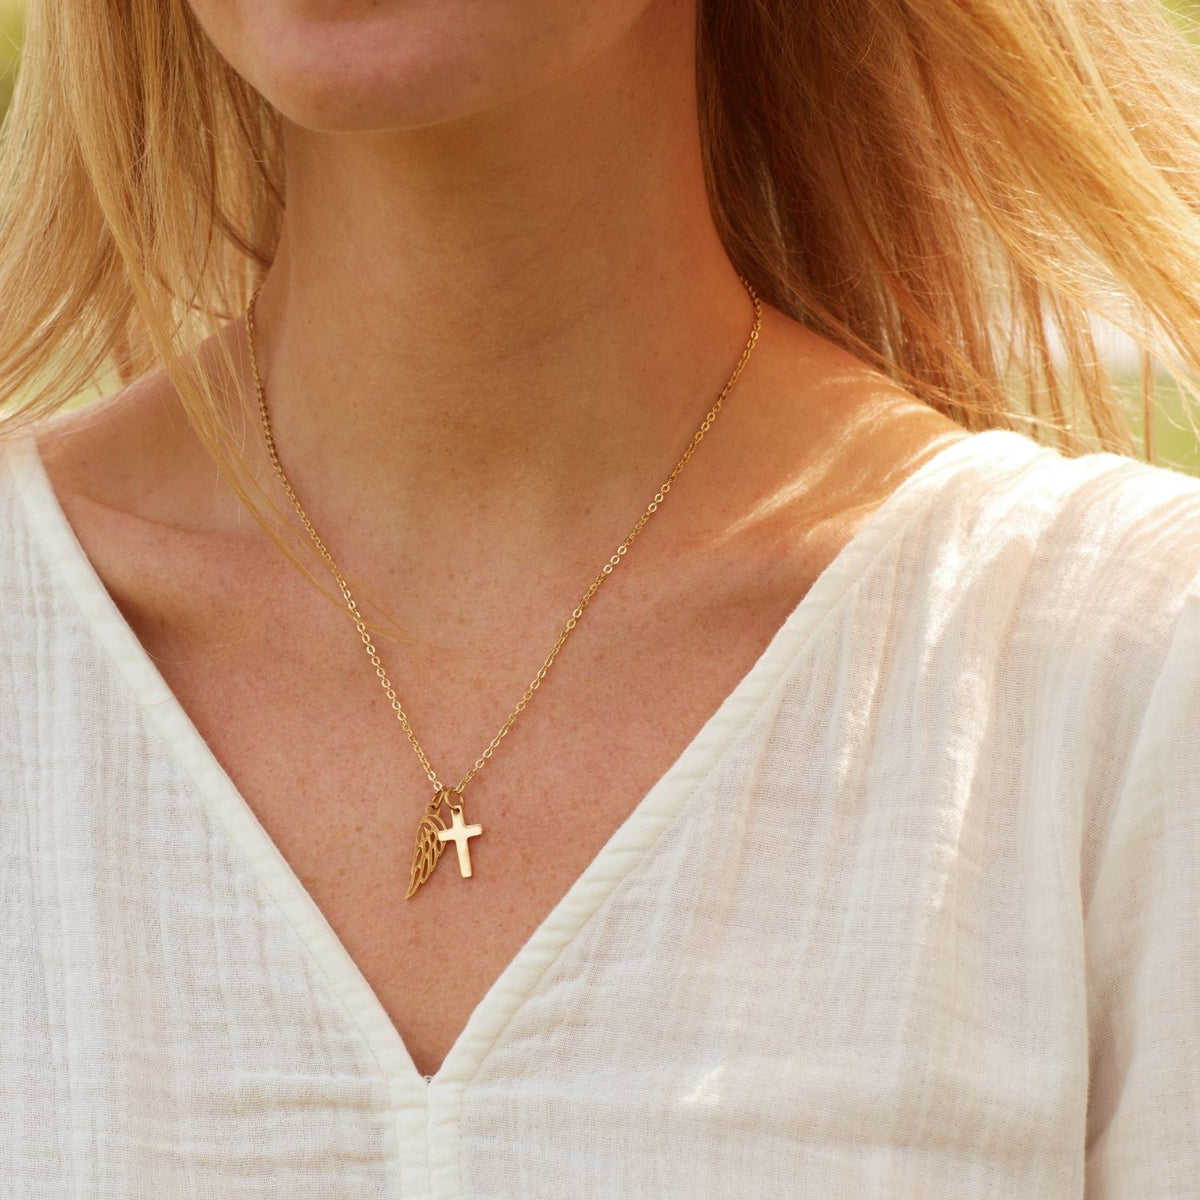 To My Bonus Mom | Life Lived for the Lord | Cross Necklace